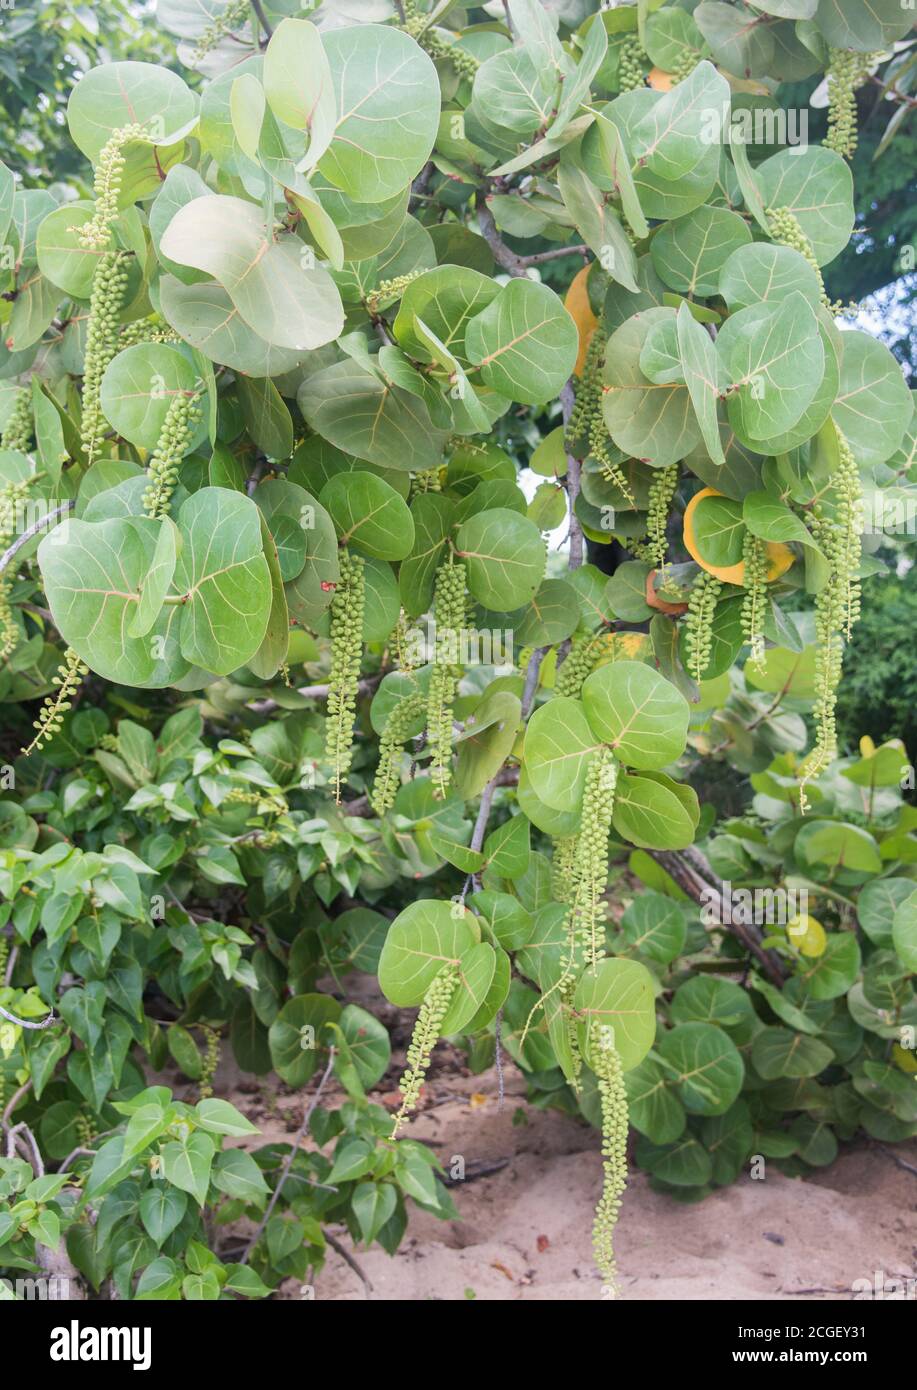 Sea grape tree with hanging clusters of unripe green sea grapes with large veined leaves on shoreline on St. Croix in the US VI Stock Photo